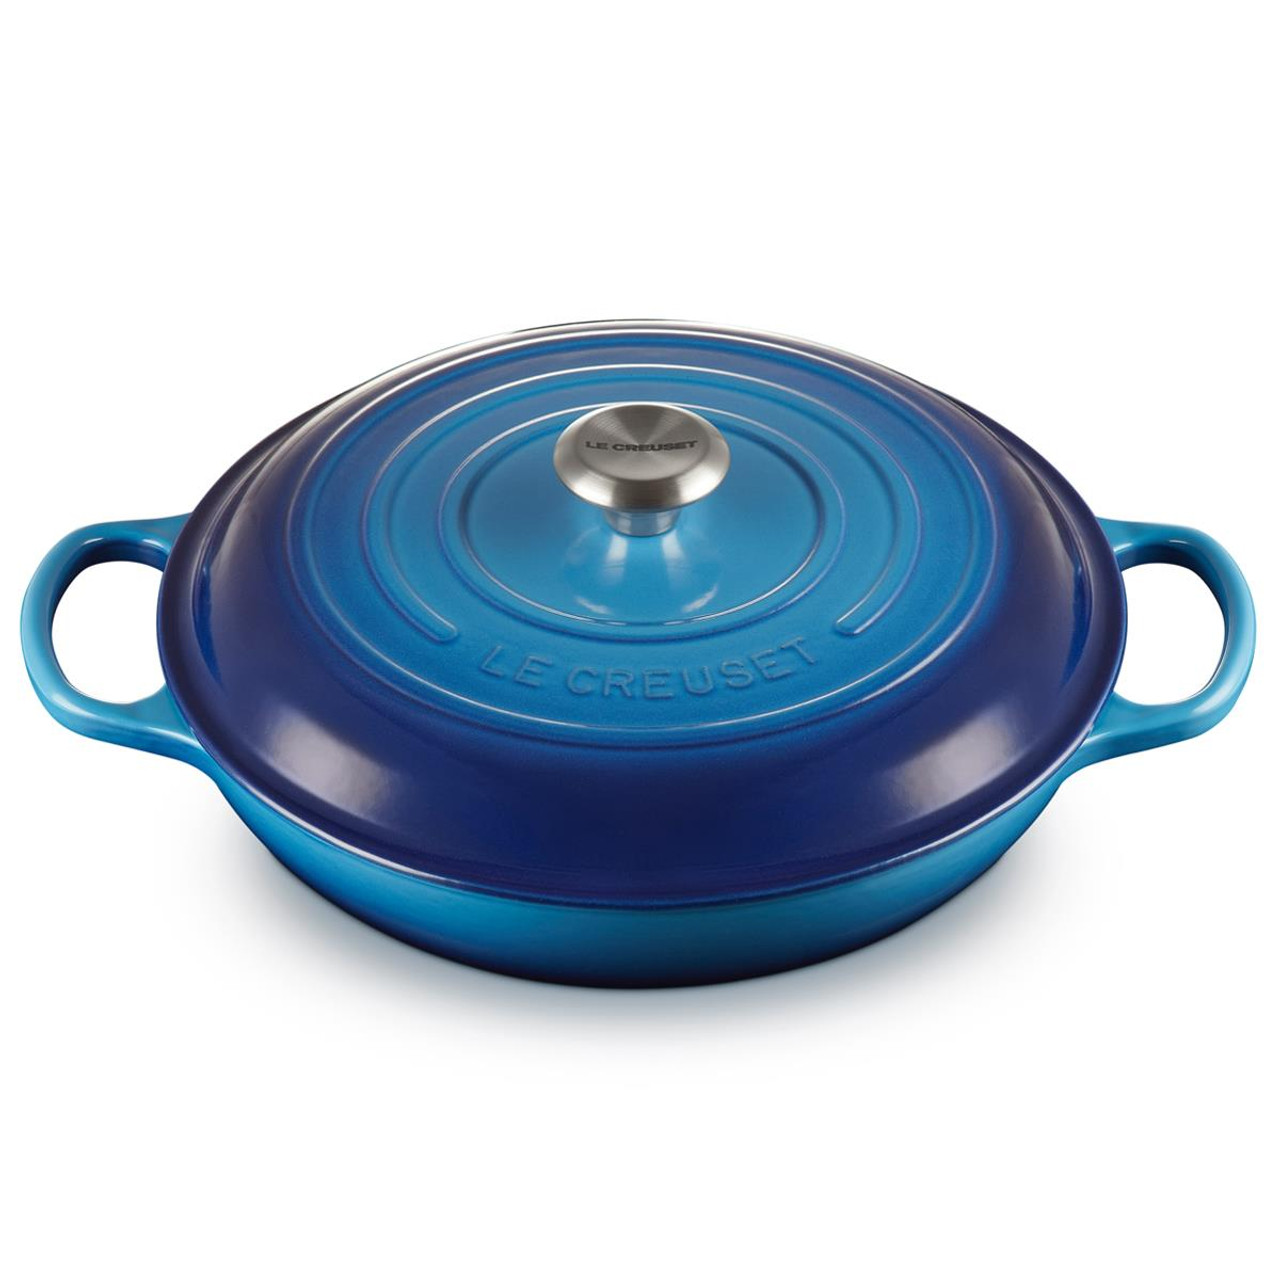 How should I clean the le creuset shallow casserole dish?